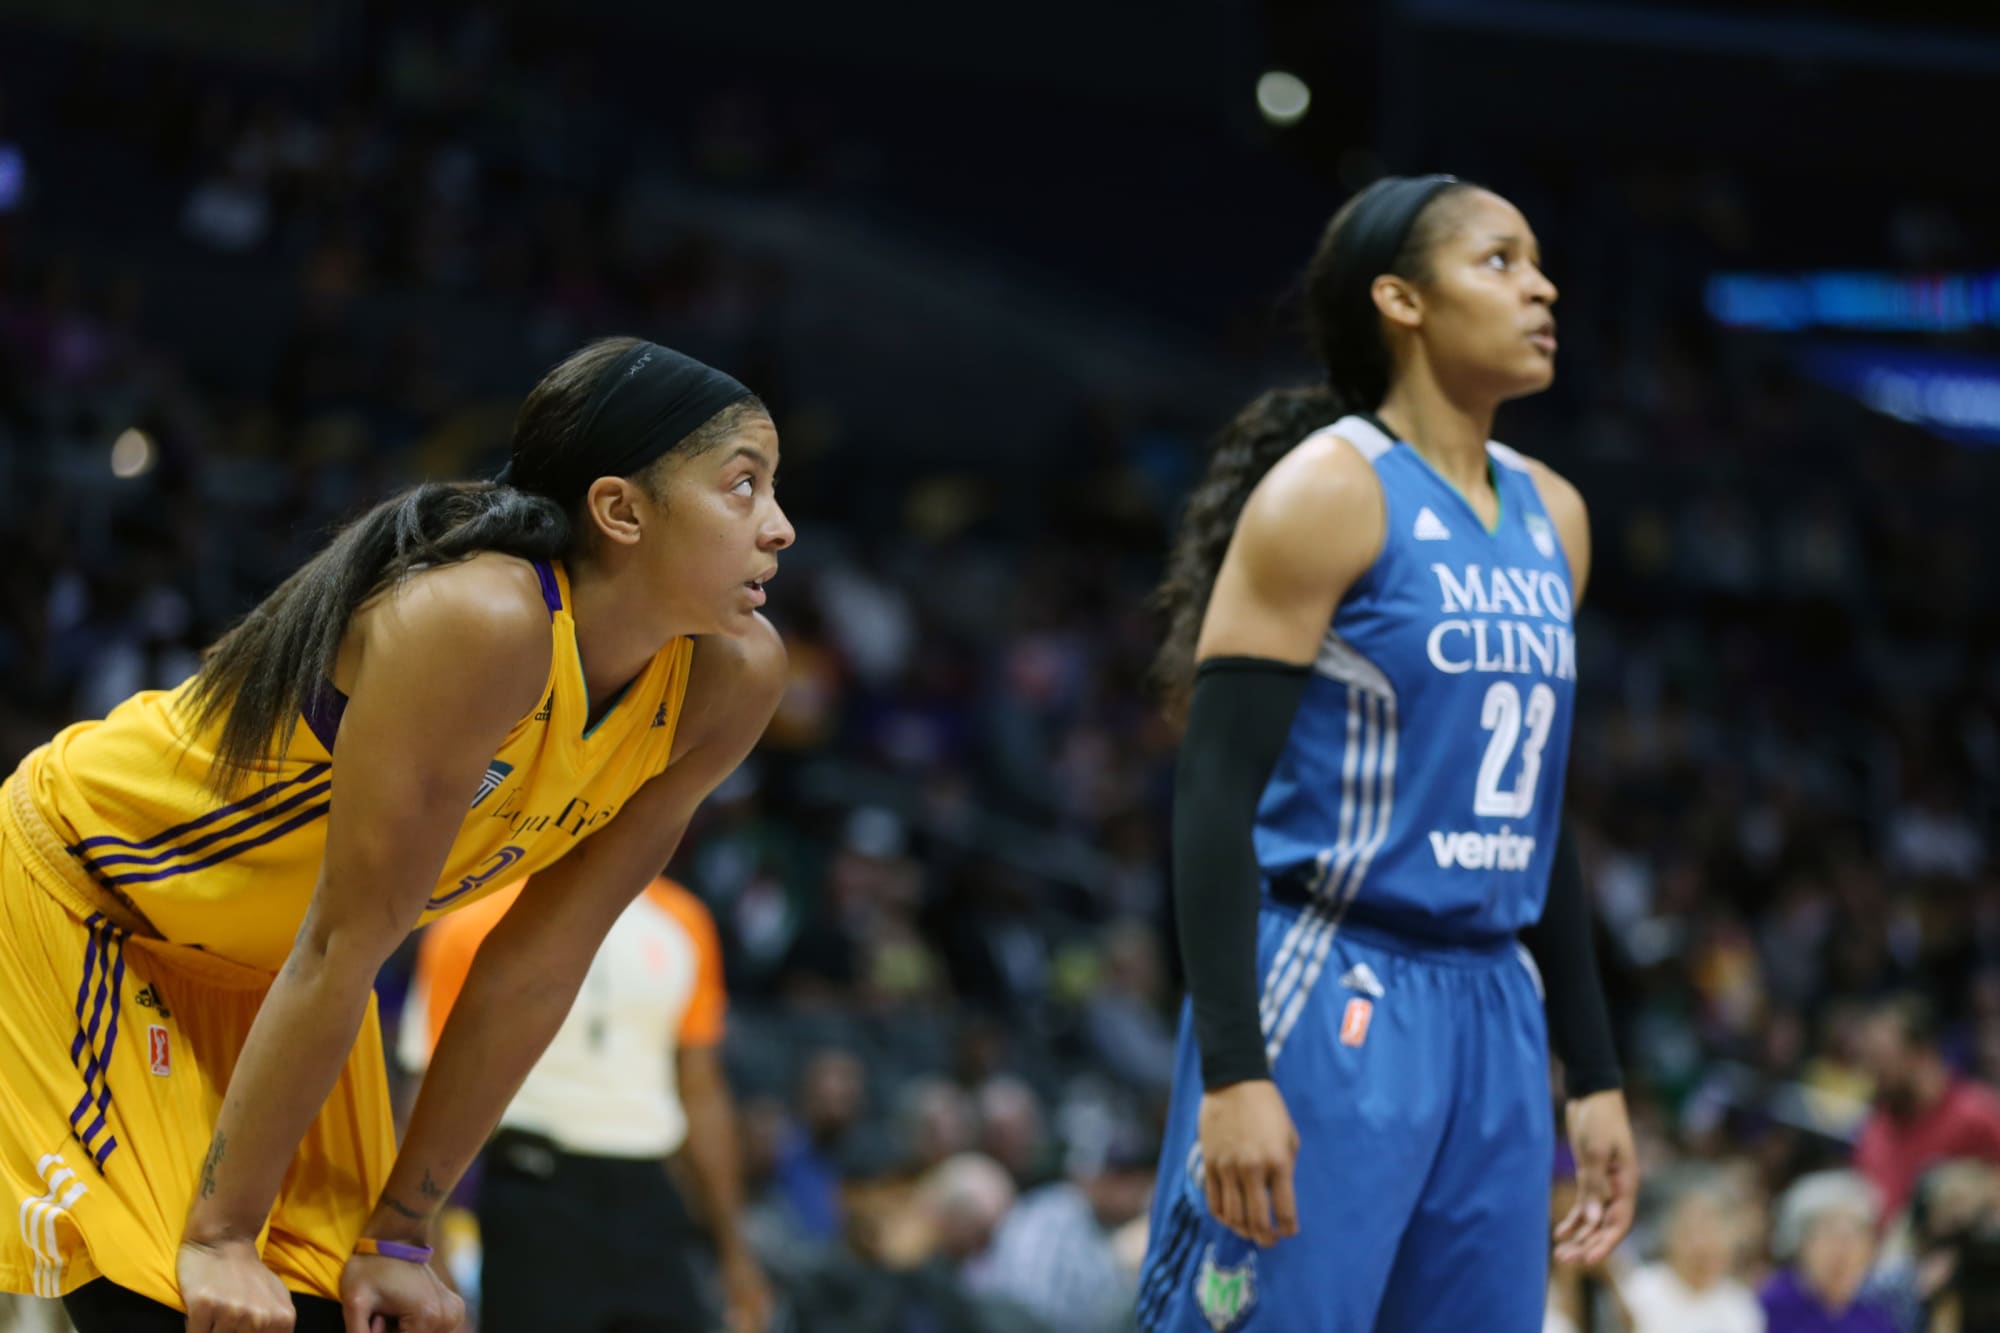 Top 20 WNBA players countdown, ranked for the 2018 season Part 2